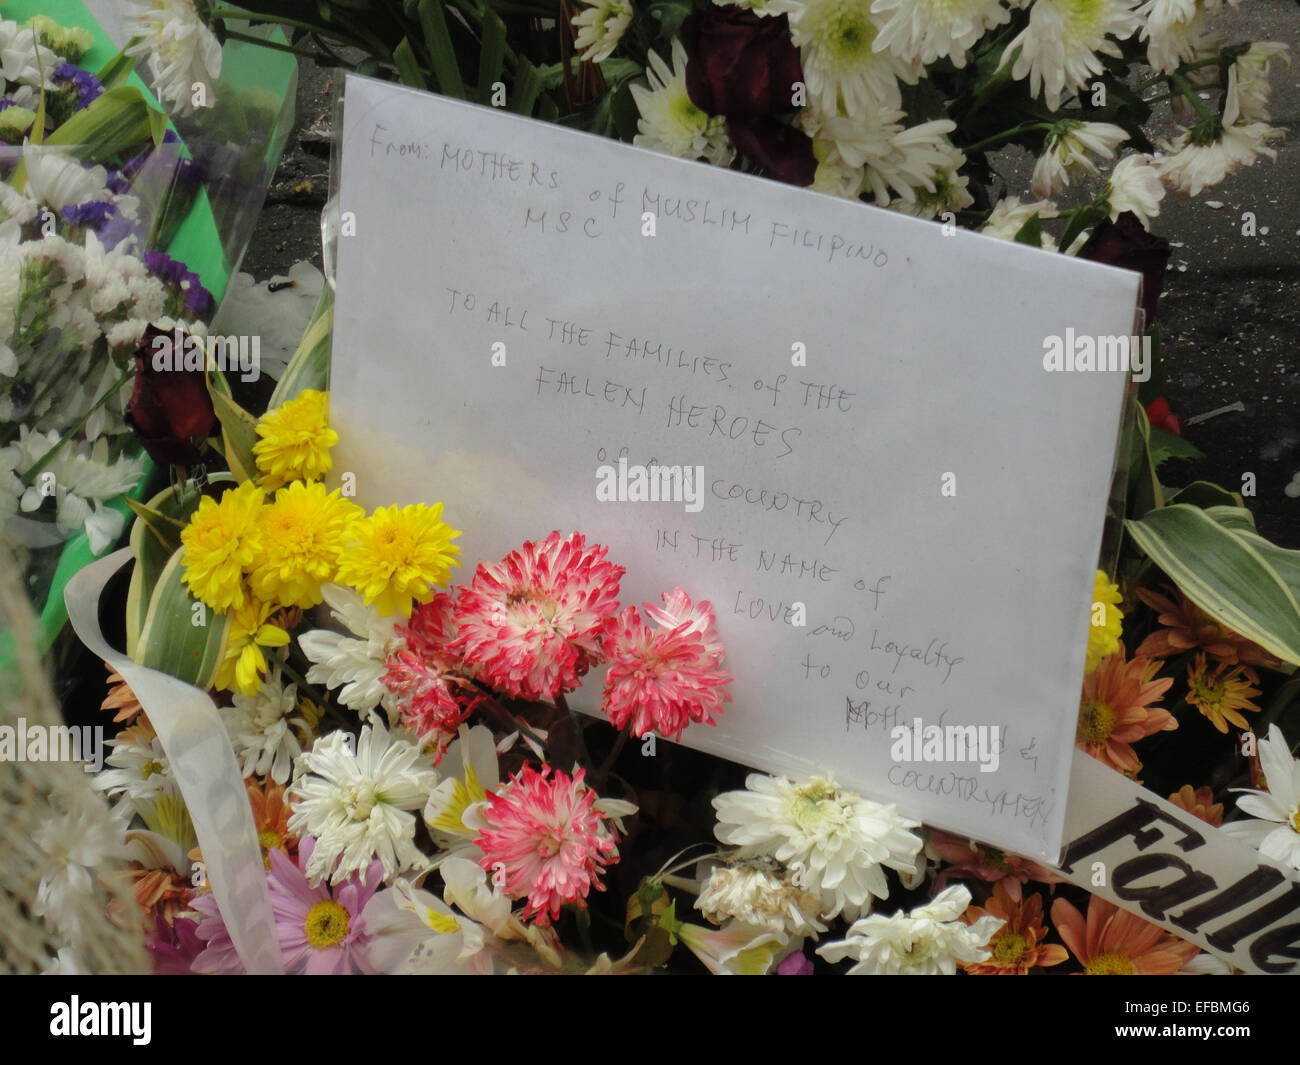 A postcard written by Filipino Muslim mothers expressing their condolences sits on top of a flower bouquet outside the Philippine National Police headquarters. Philippine President Benigno Aquino III declared a National Day of Mourning to commemorate the 44 elite commandos who were slain in an encounter at Mamasapano, Maguindanao province. © Richard James Mendoza/Pacific Press/Alamy Live News Stock Photo